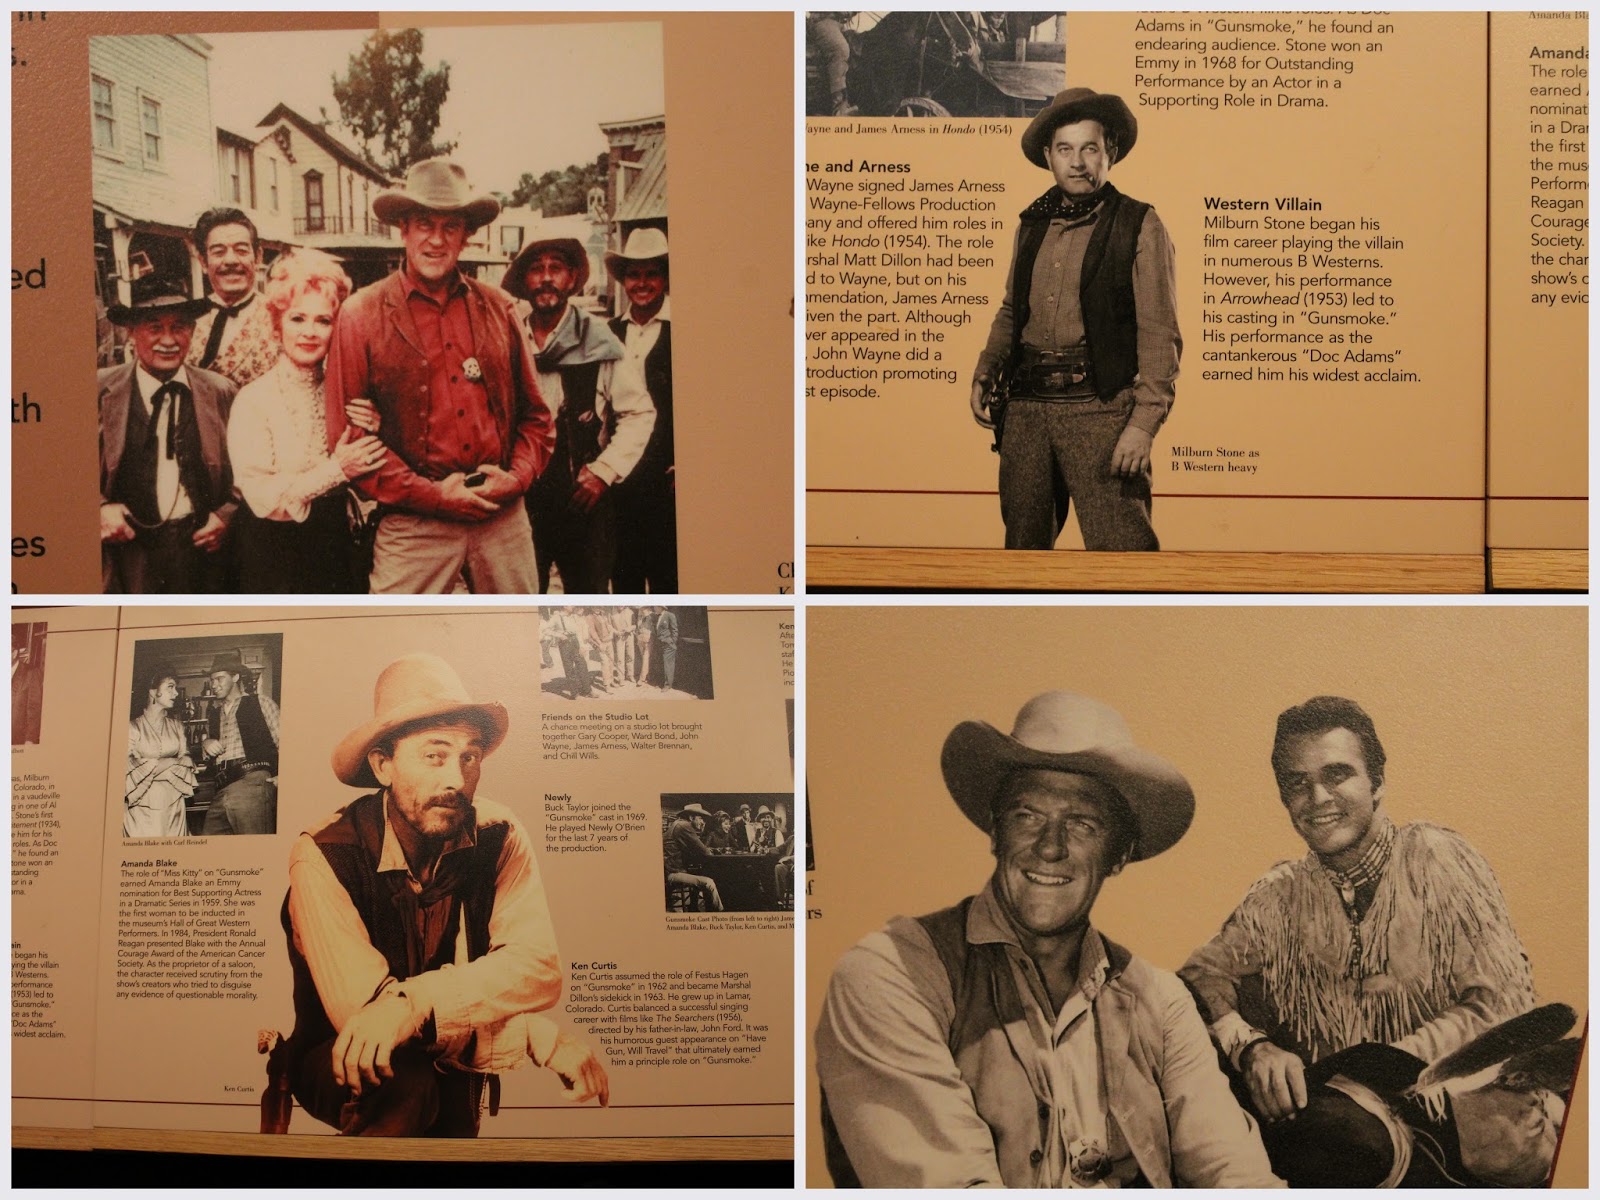 The Roadrunner Chronicles: Fantastic Cowboy and Western Heritage Museum in OKC